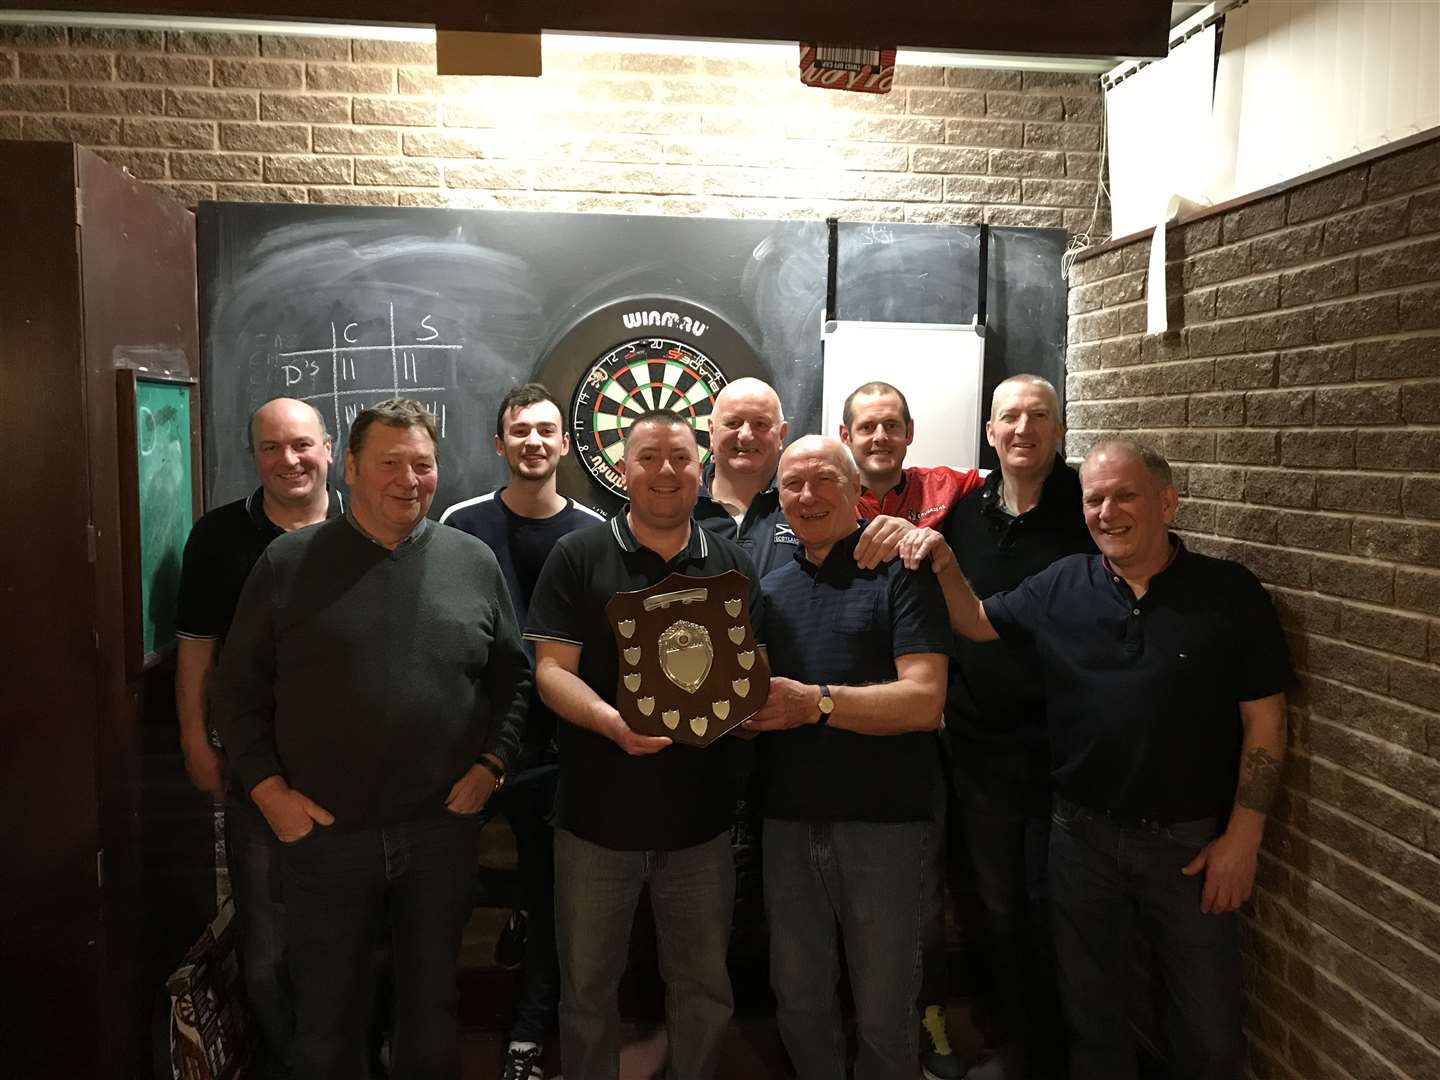 Springfield Bar won the Imperial Cup.